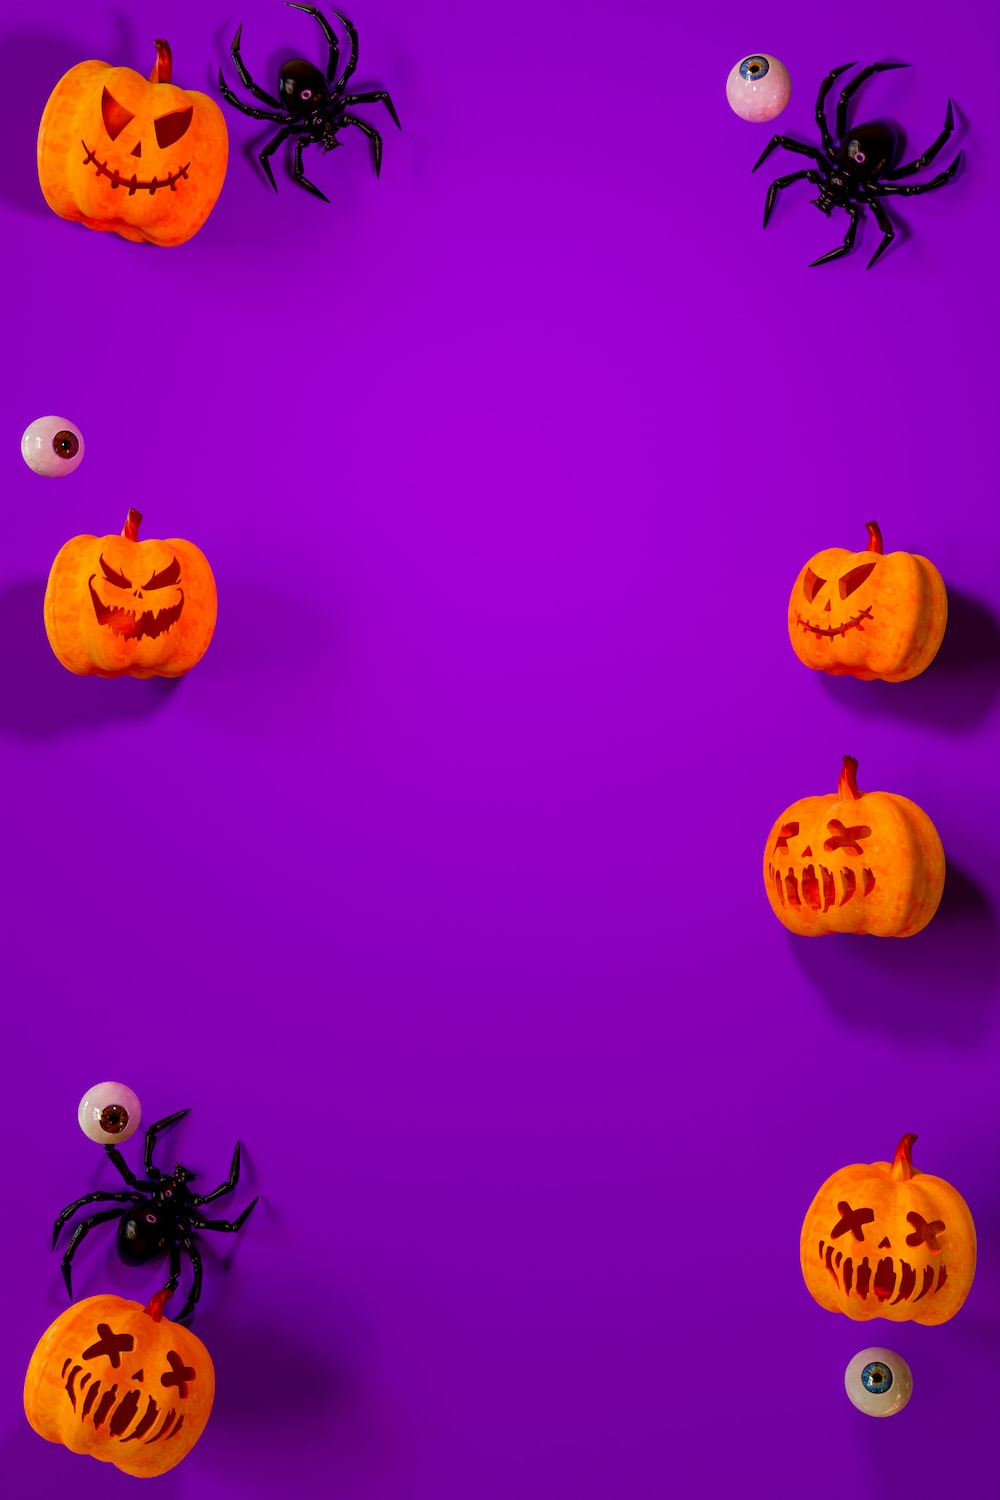 Halloween Background Picture. Download Free Image